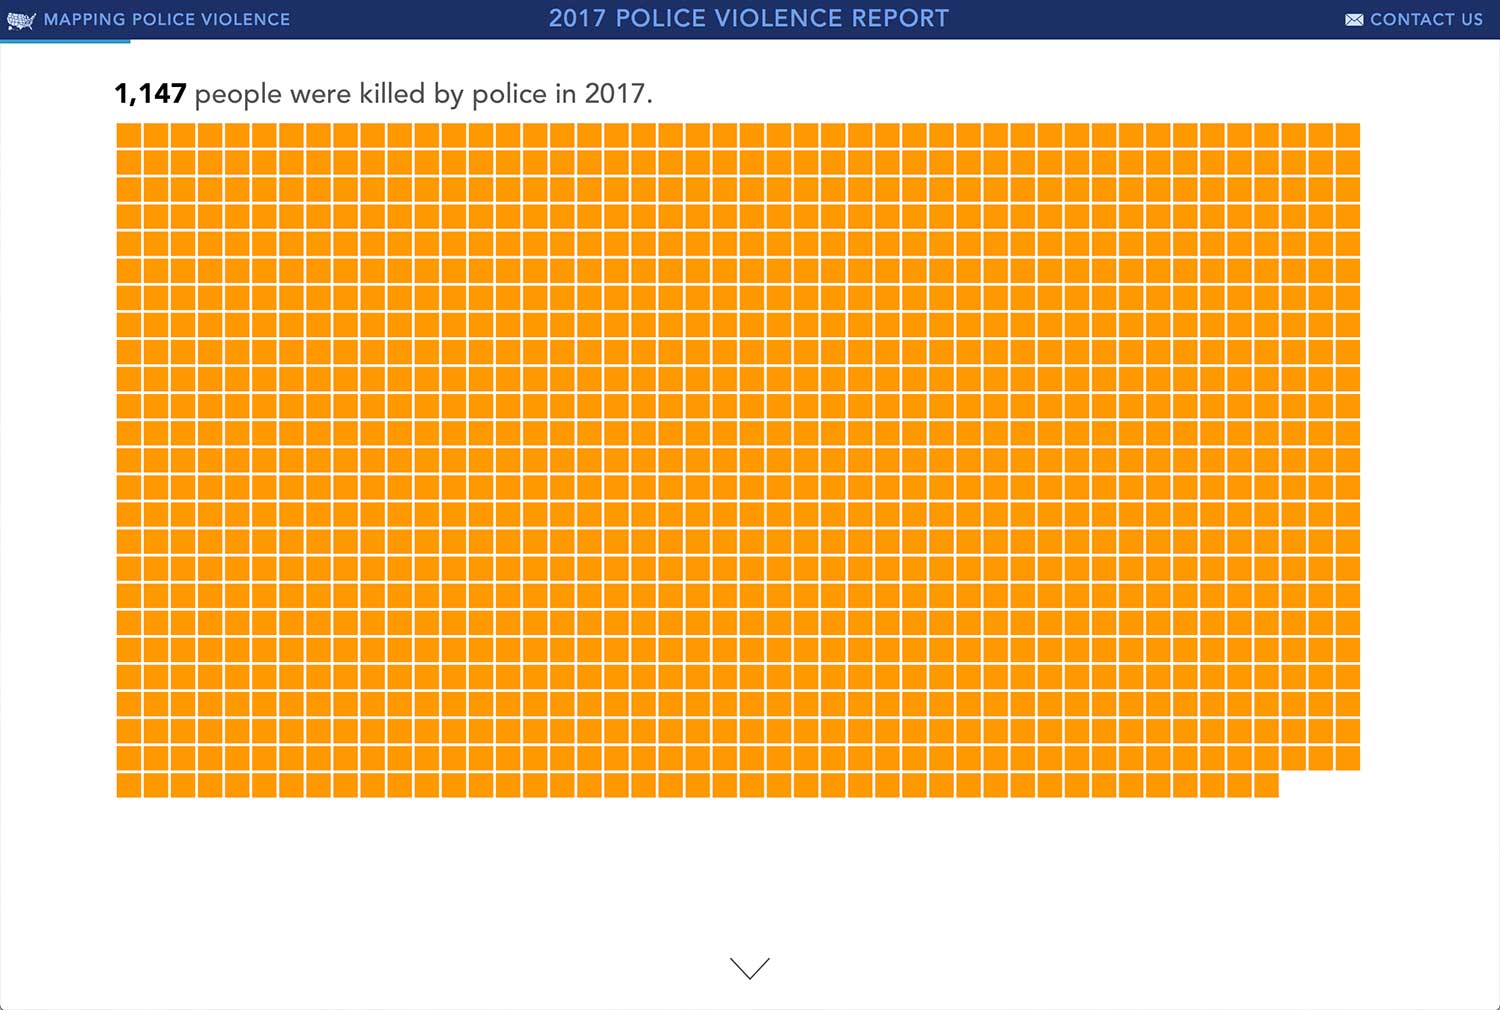 Police Violence Report, all victims represented by orange squares